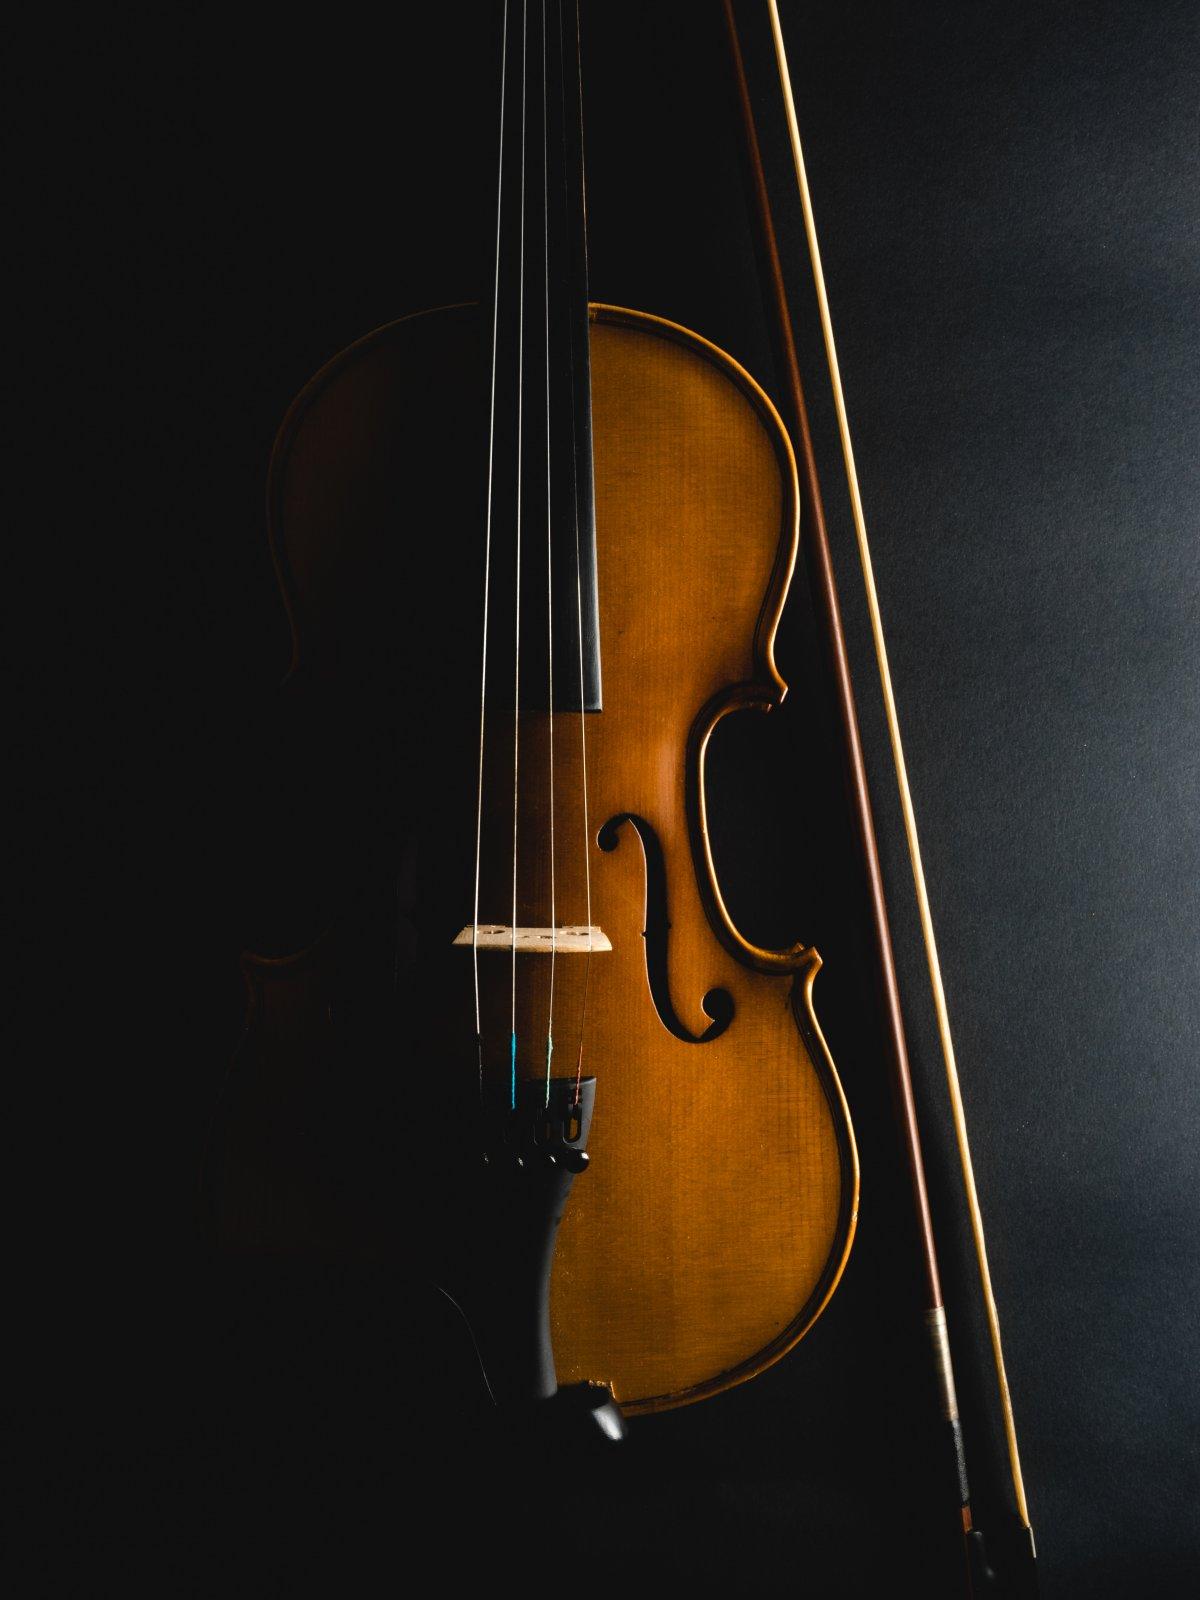 An Introduction to the World of Fiddle Tunes